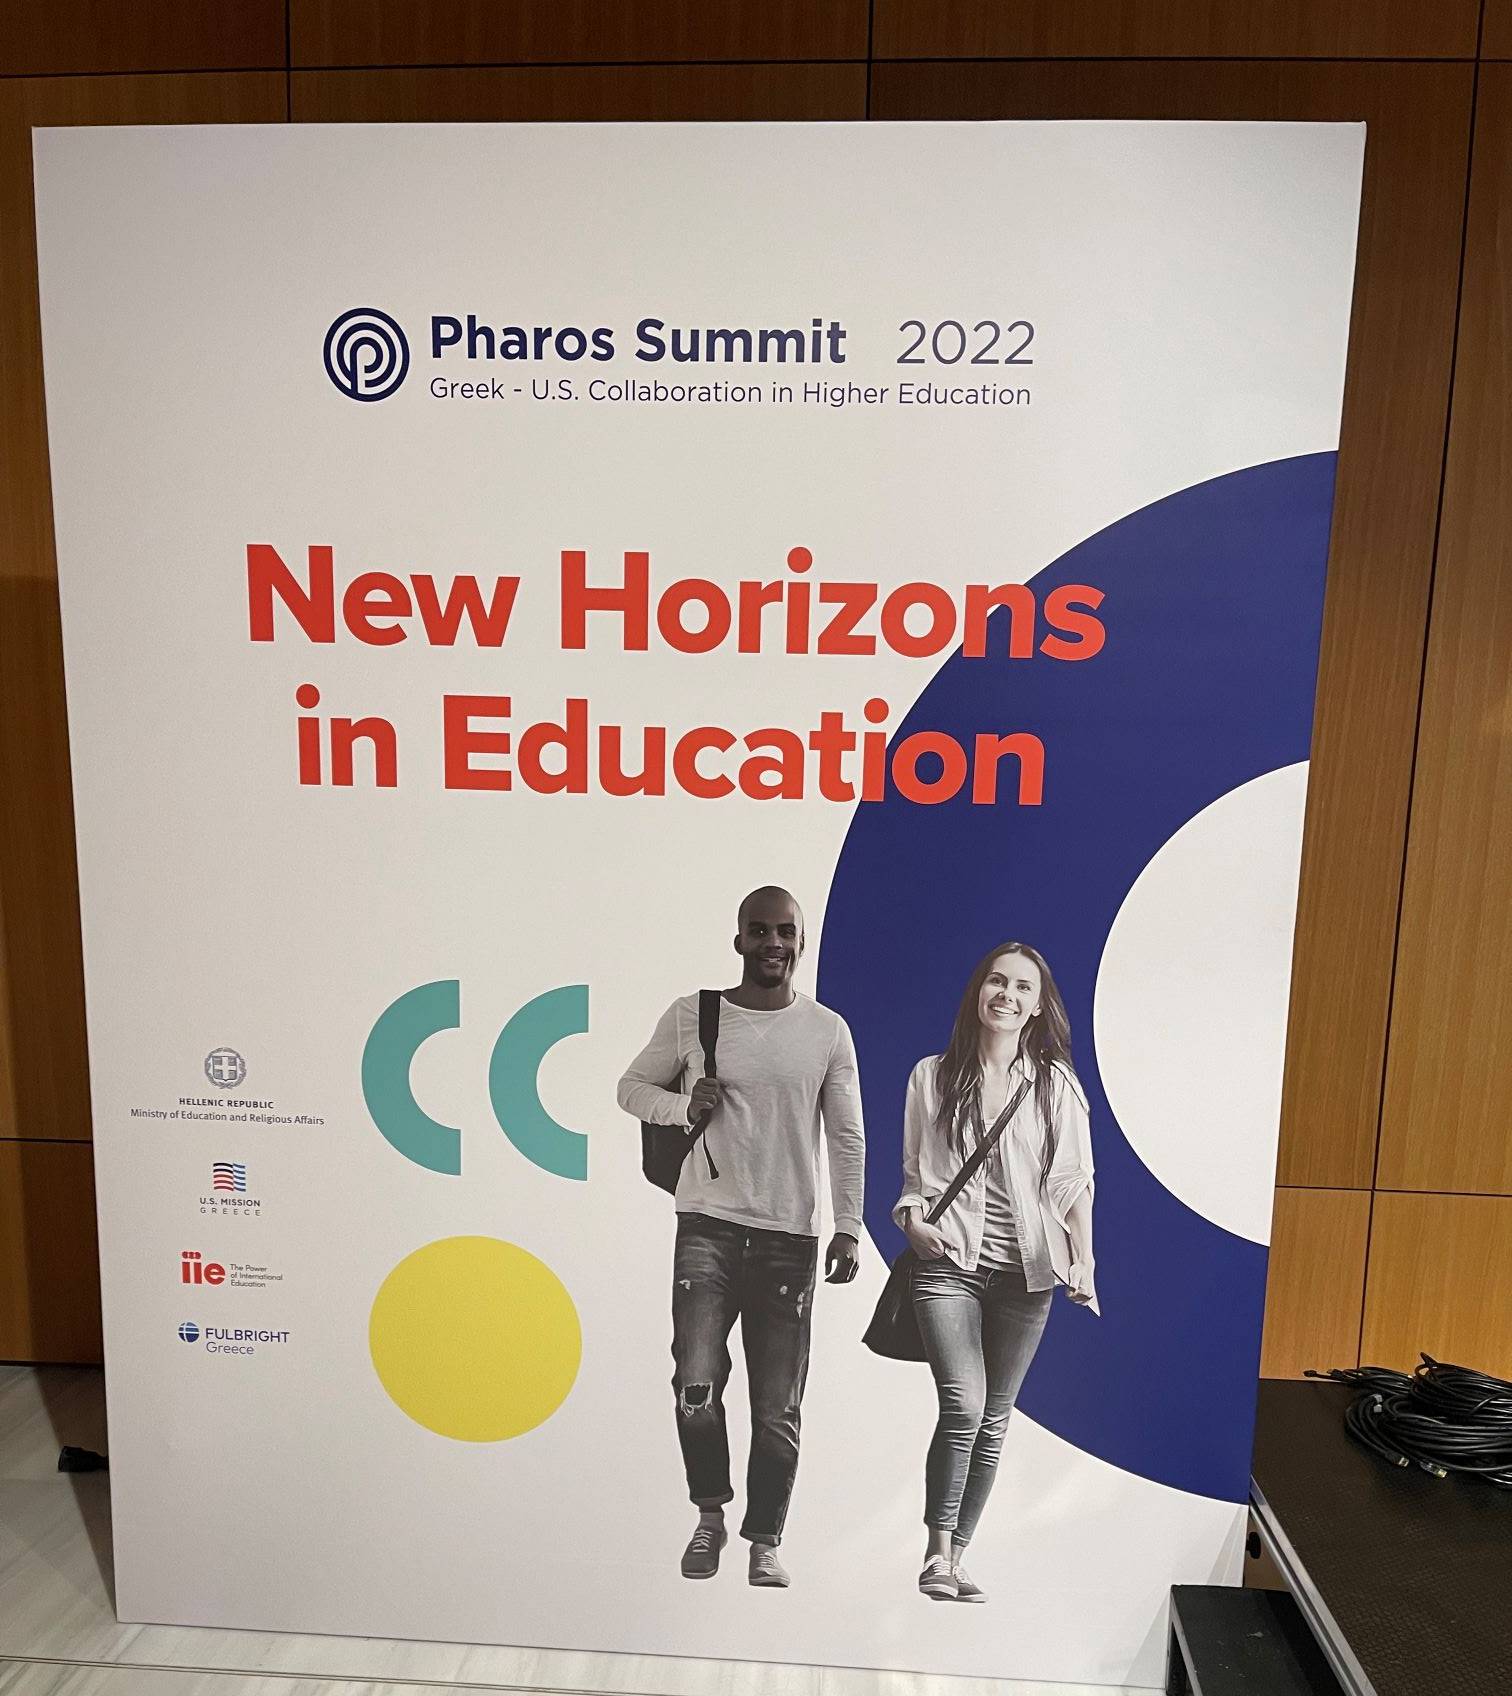 The goal of the Pharos Summit 2022 was to forge connections and foster collaborations between U.S. and Greek institutions to expand study abroad opportunities for students in both countries.